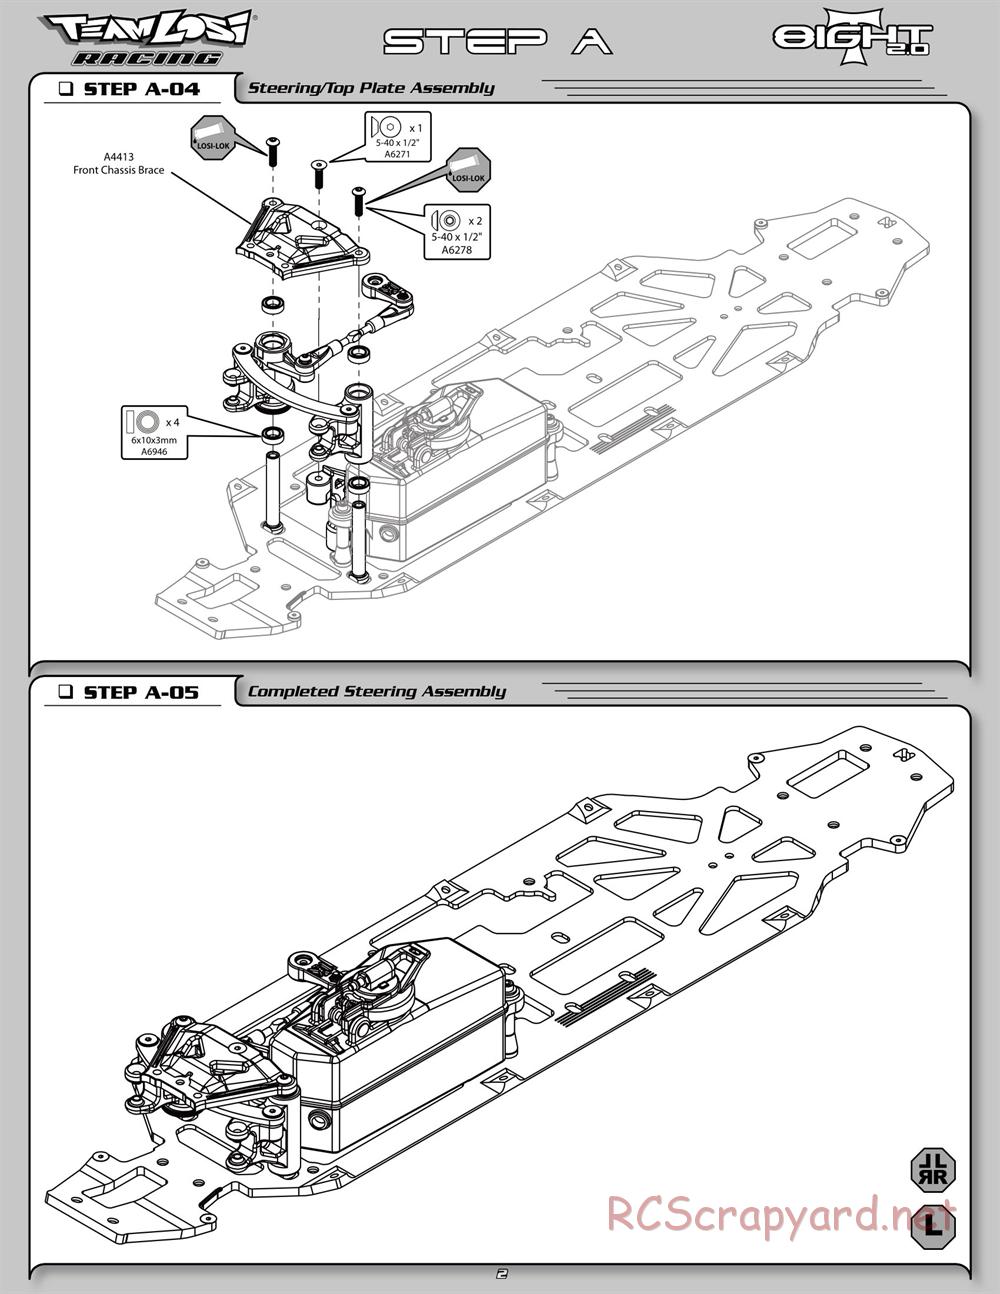 Team Losi - 8ight-T 2.0 Race Roller - Manual - Page 7